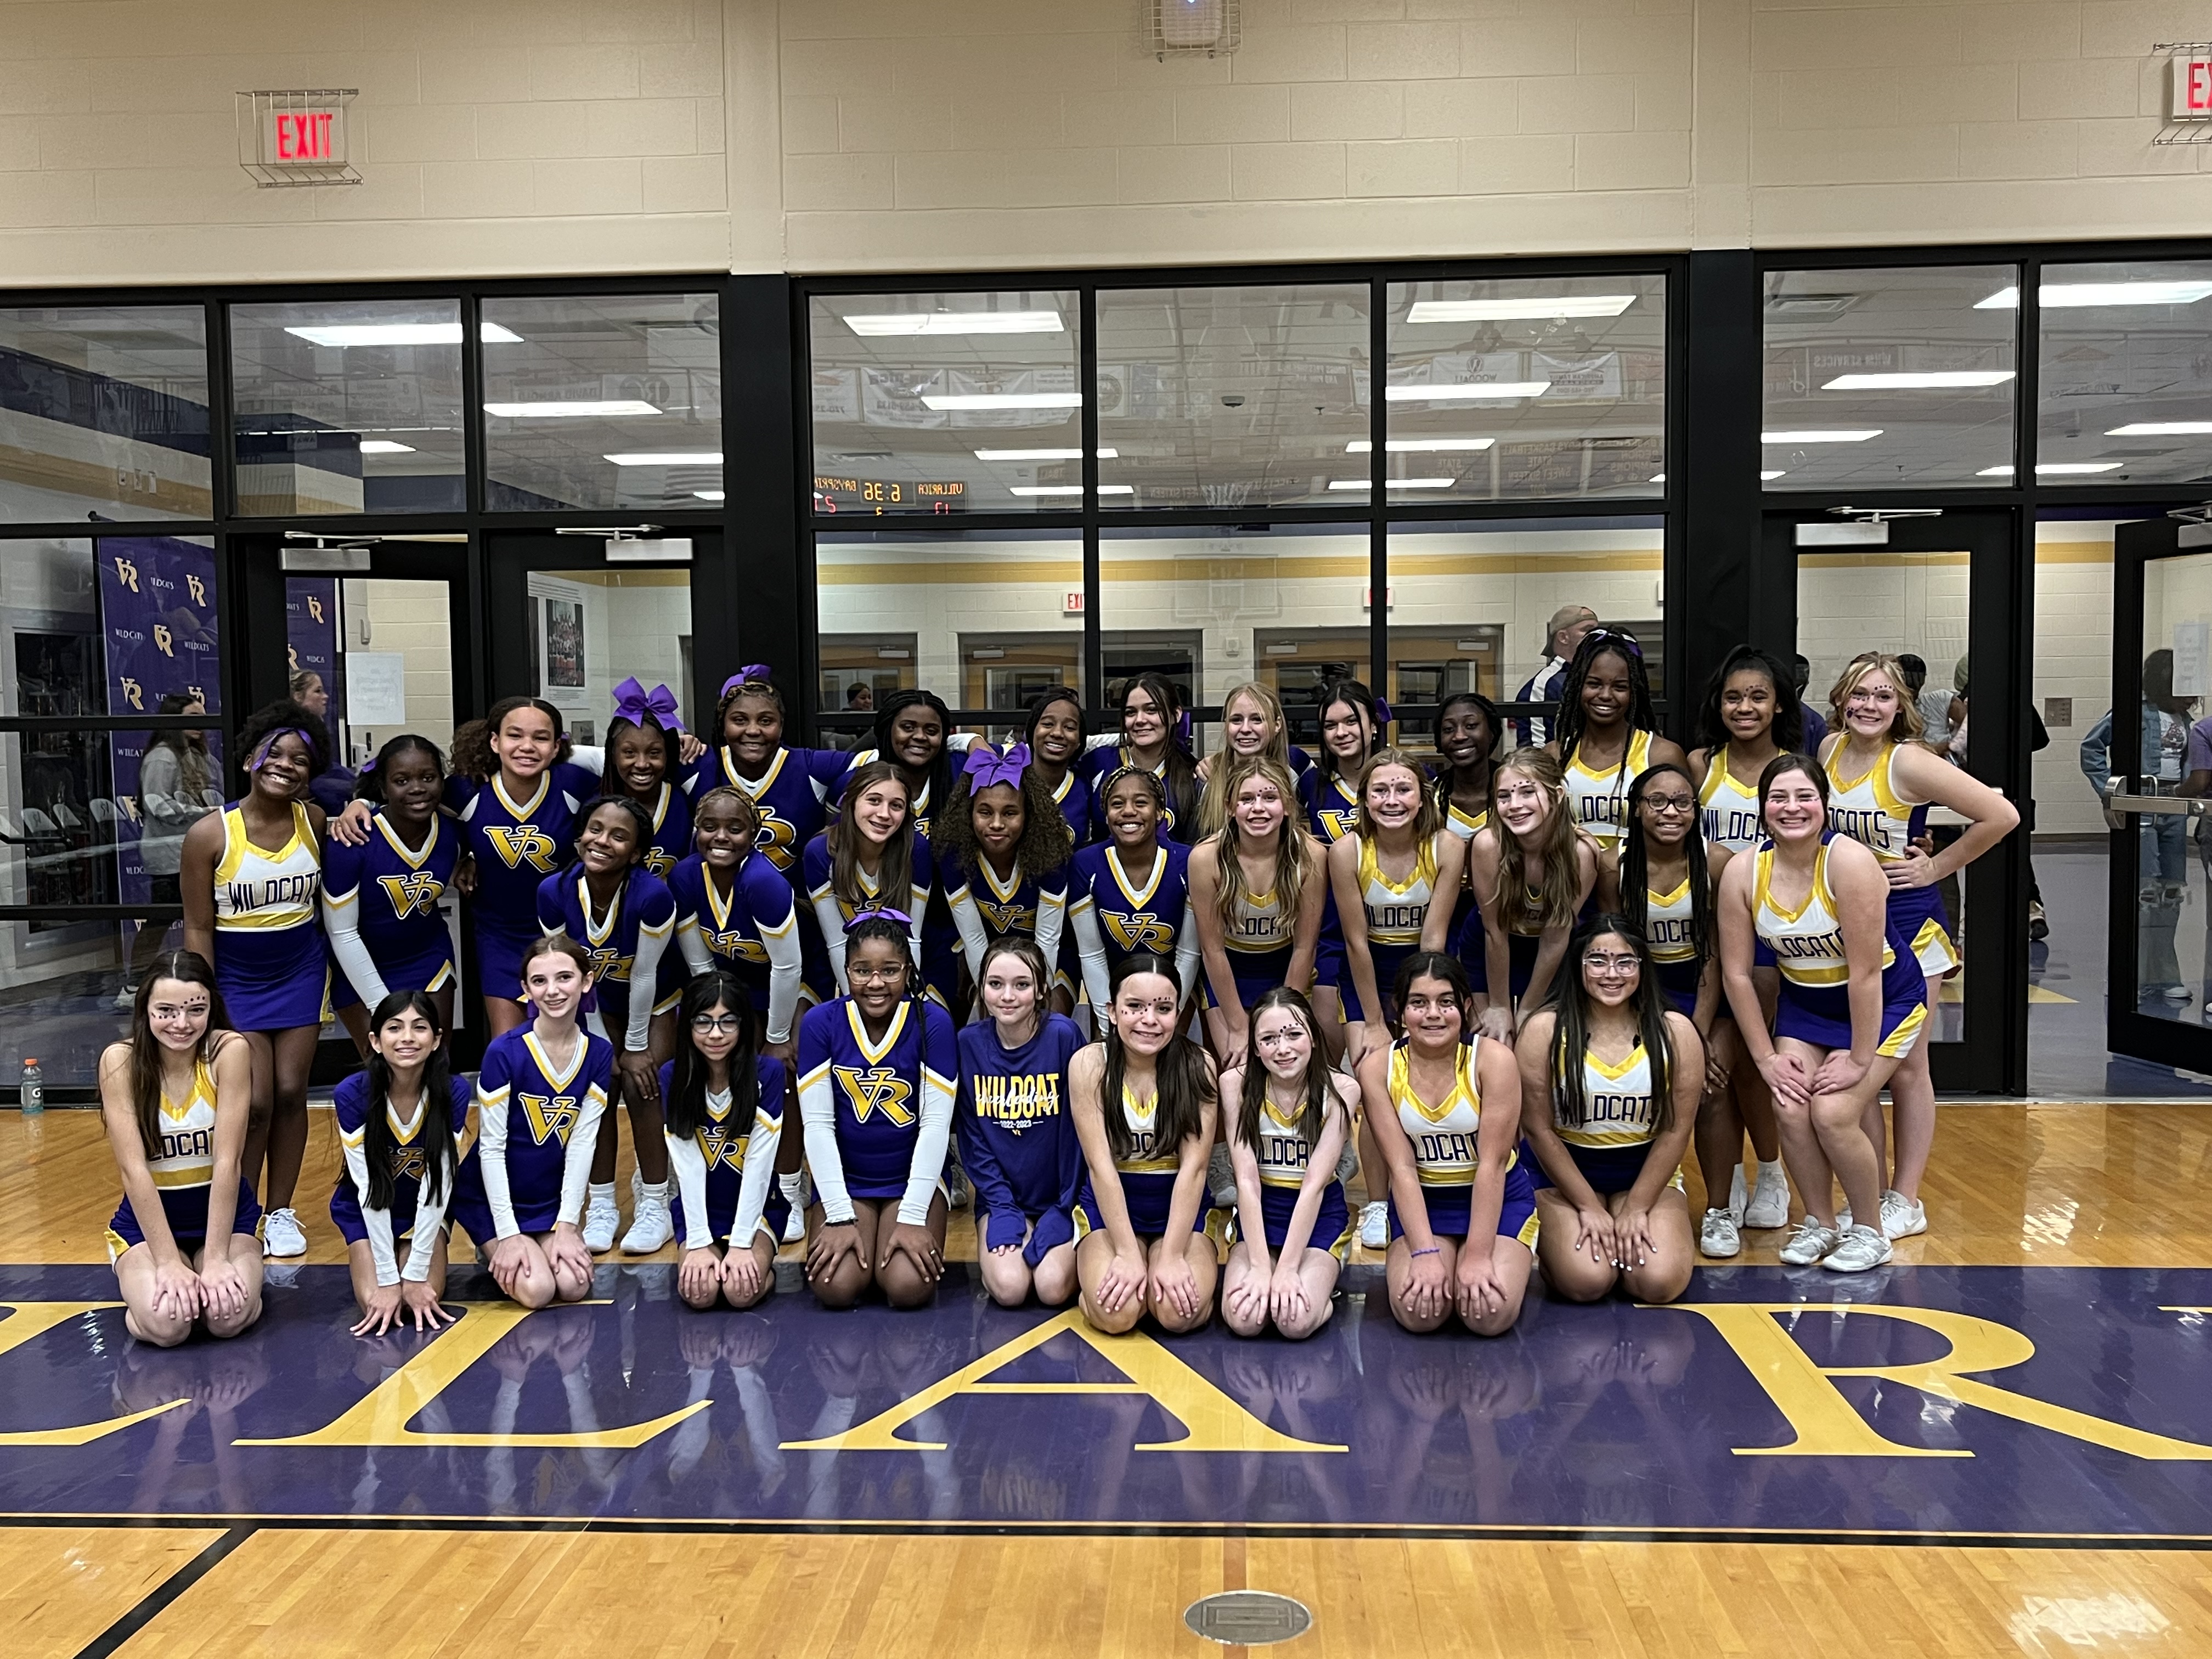 VRMS and BSMS cheerleaders posing for photo